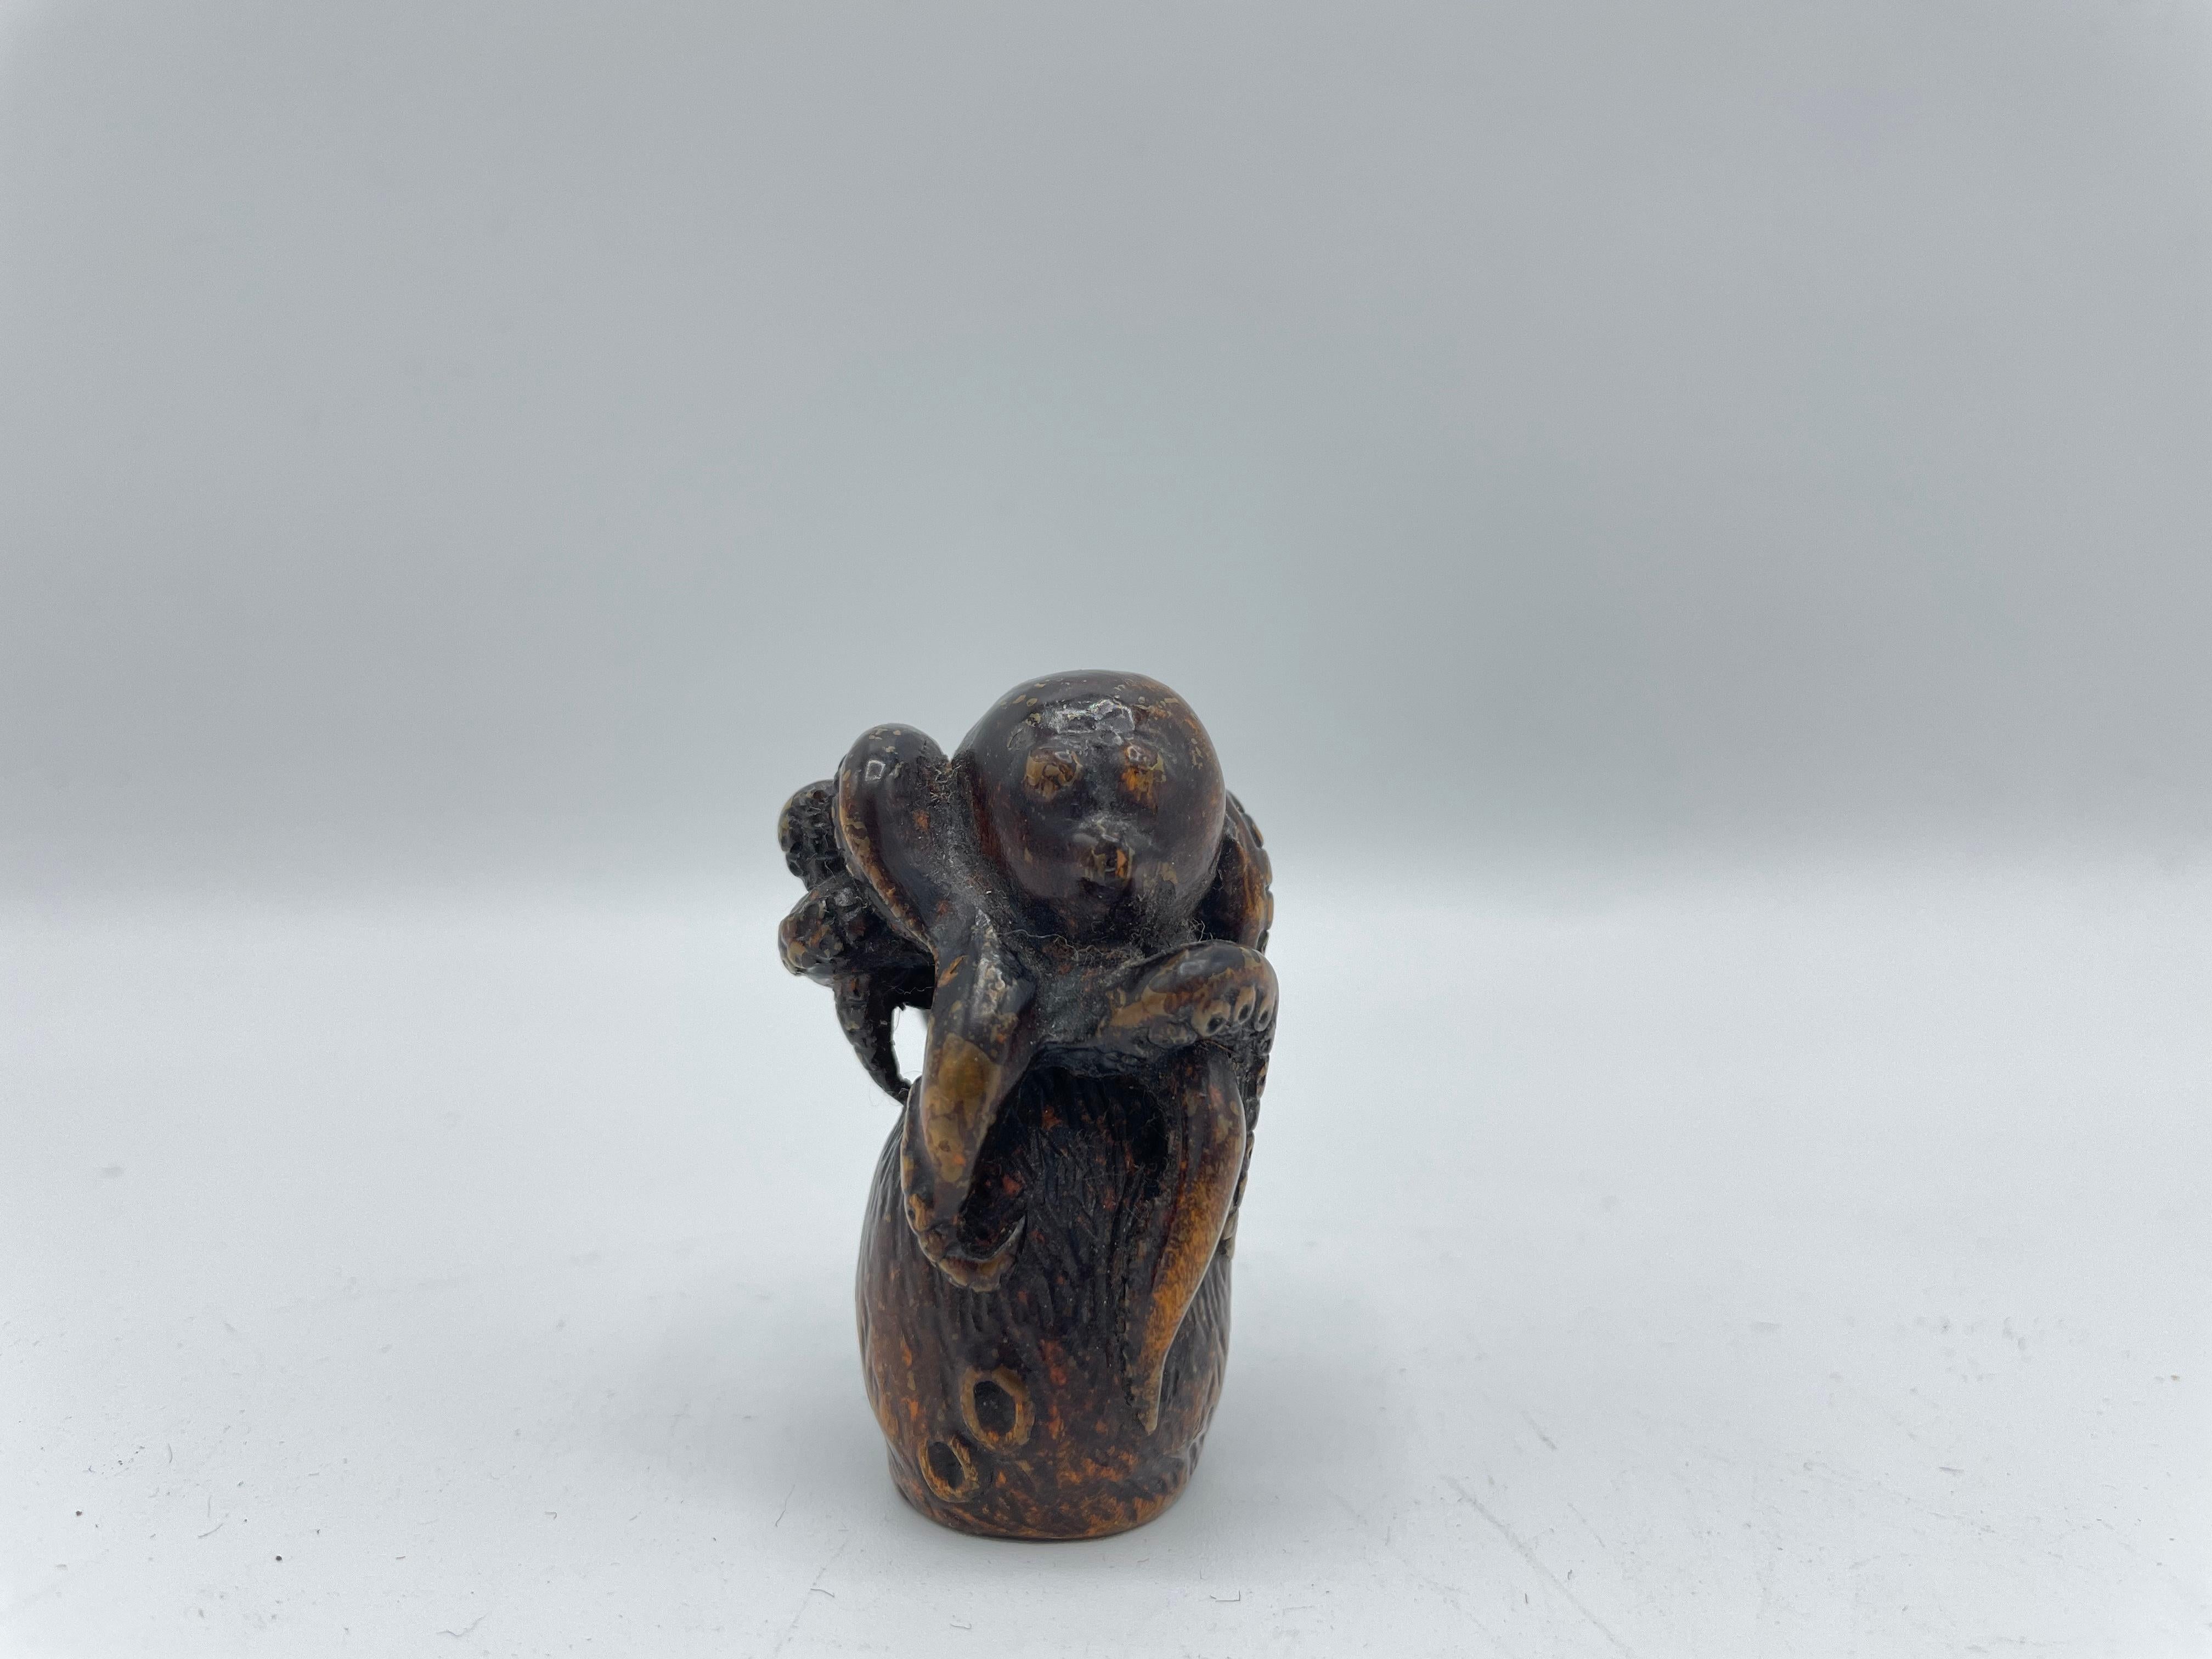 This is an antique netsuke made in Japan around Edo period 1800s.
Netsuke is a miniature sculpture, originating in 17th century Japan.
Initially a simply-carved button fastener on the cords of an inro box, netsuke later developed into ornately